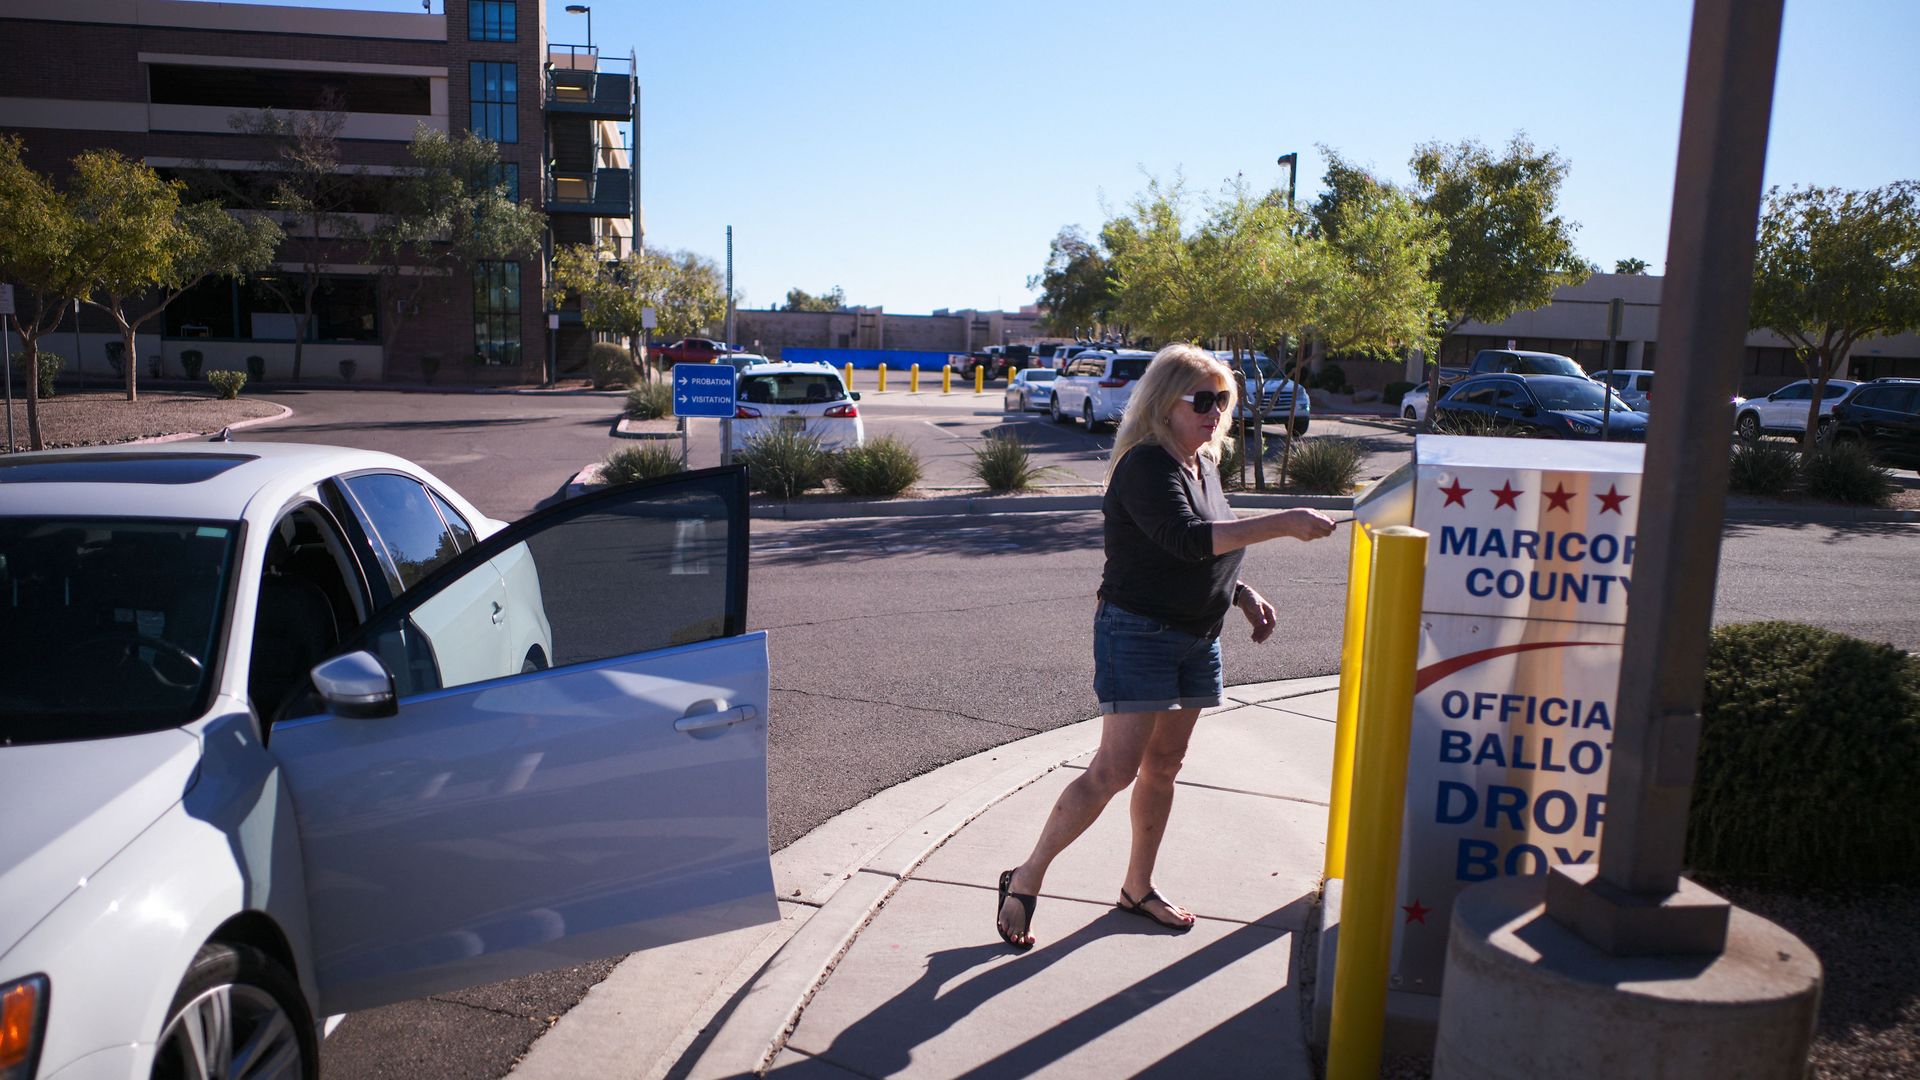 A woman drops her ballot for the upcoming midterm elections in the drop box near the Maricopa County Juvenile Court Center in Mesa, Arizona on October 25.